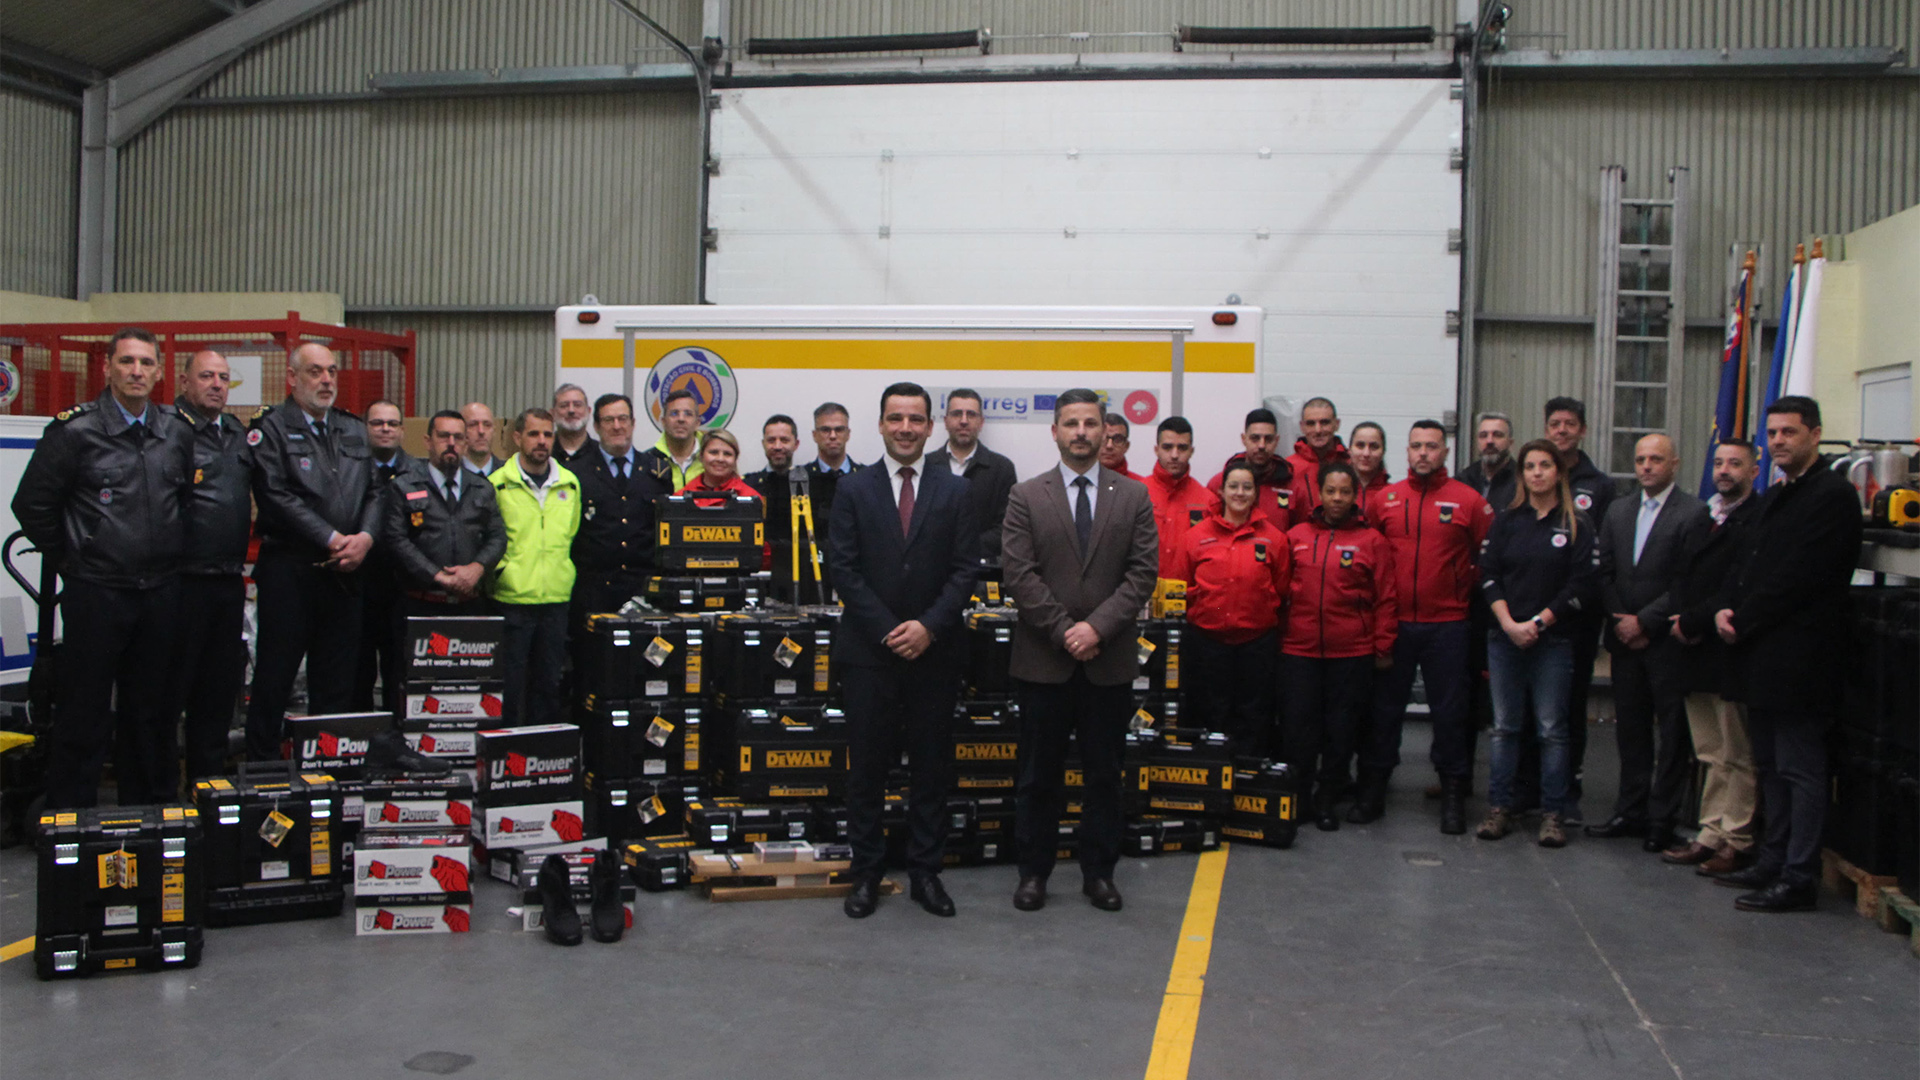 Regional Secretary for the Environment and Climate Action delivers equipment to firefighters and SIV teams